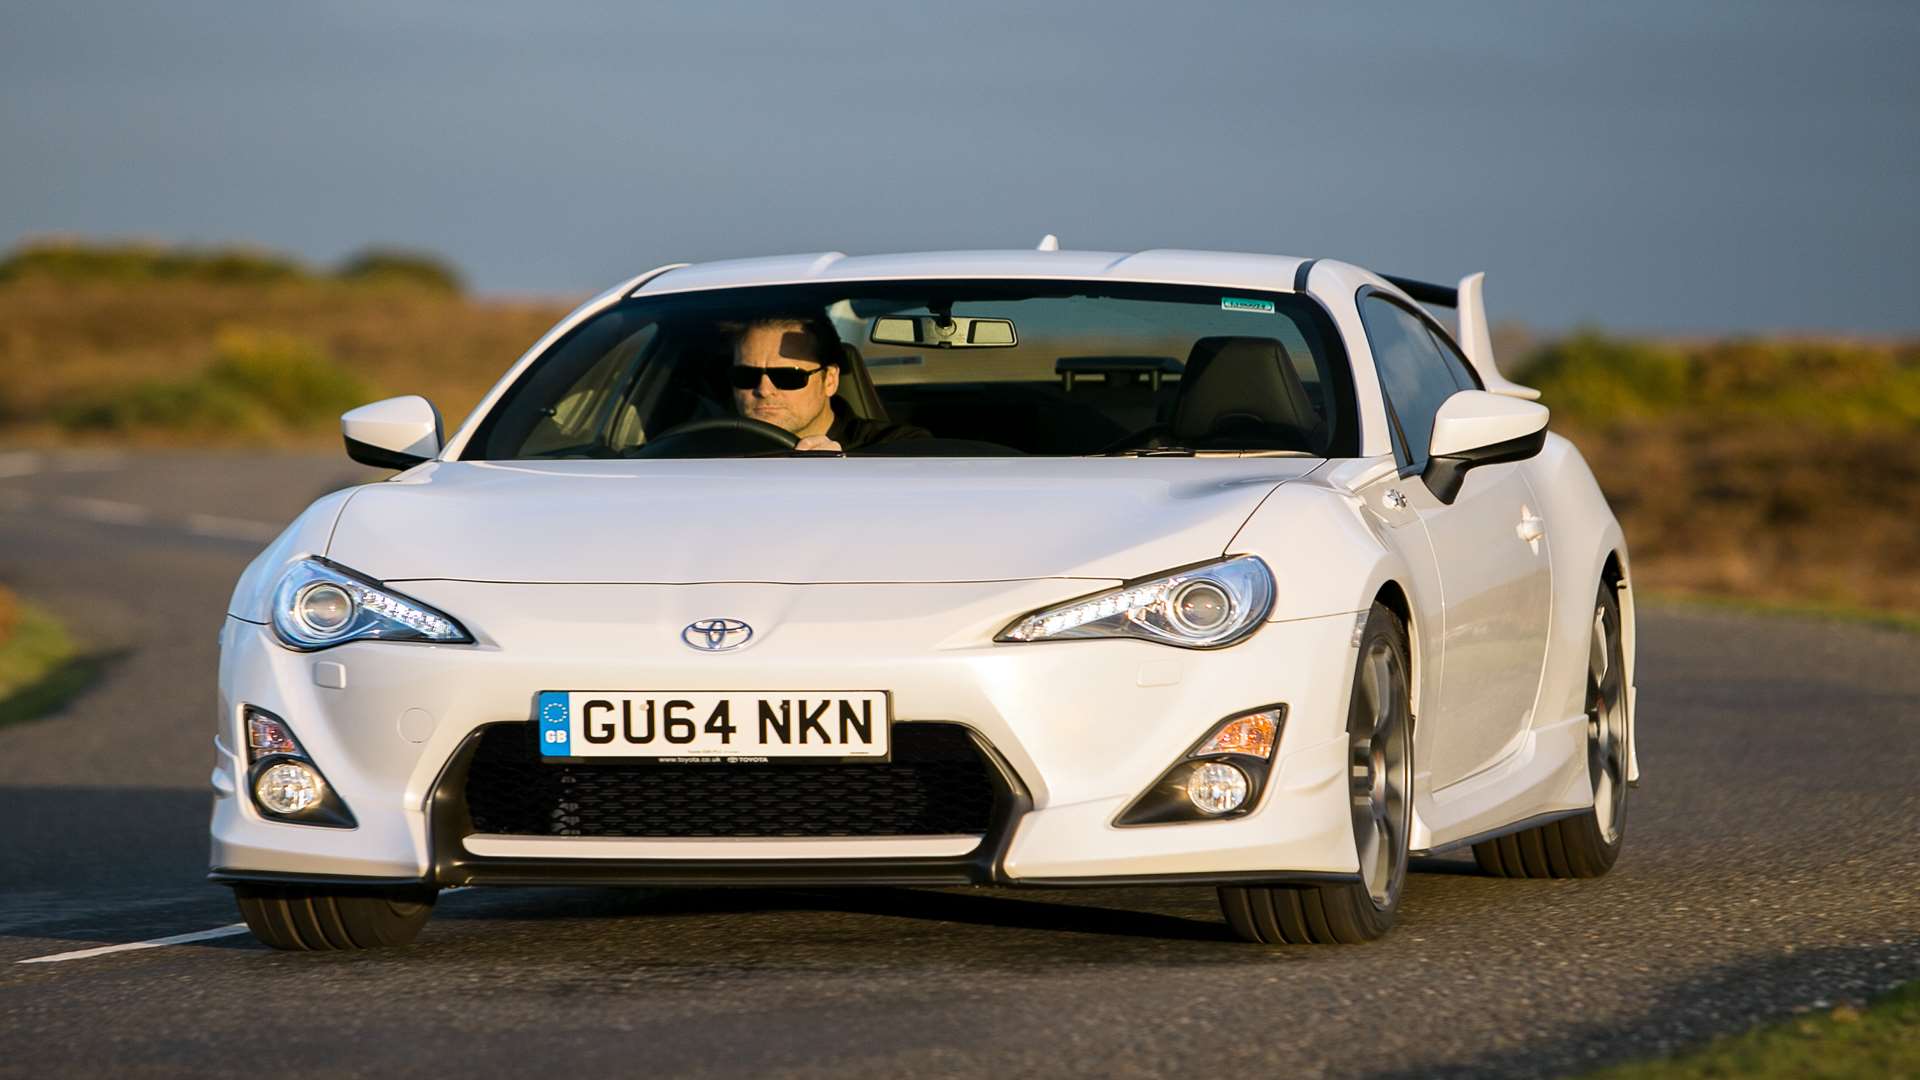 The stiffly-sprung GT86 excels in corners